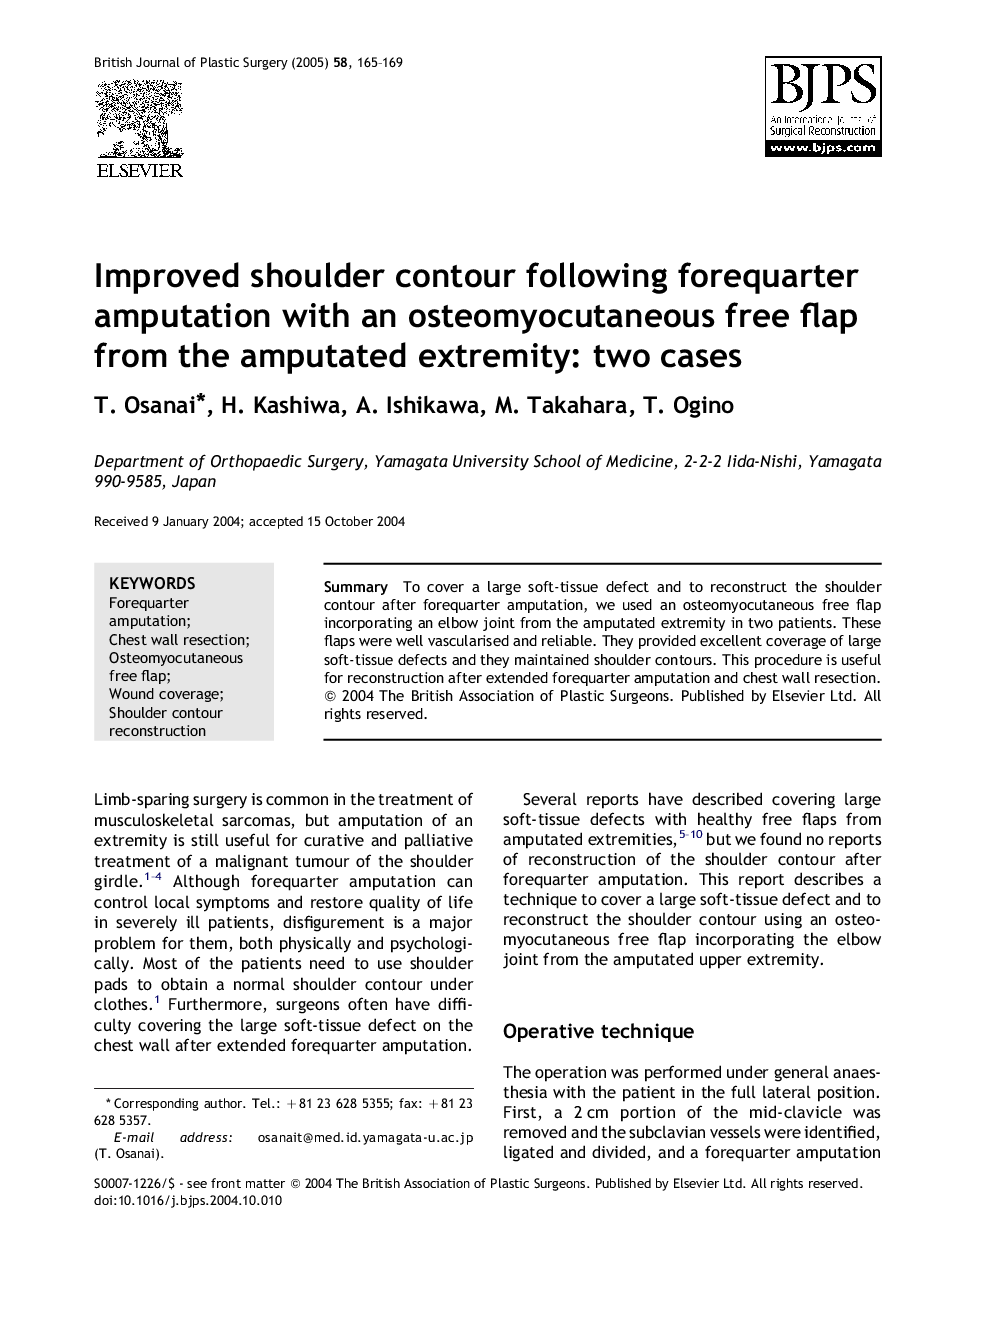 Improved shoulder contour following forequarter amputation with an osteomyocutaneous free flap from the amputated extremity: two cases